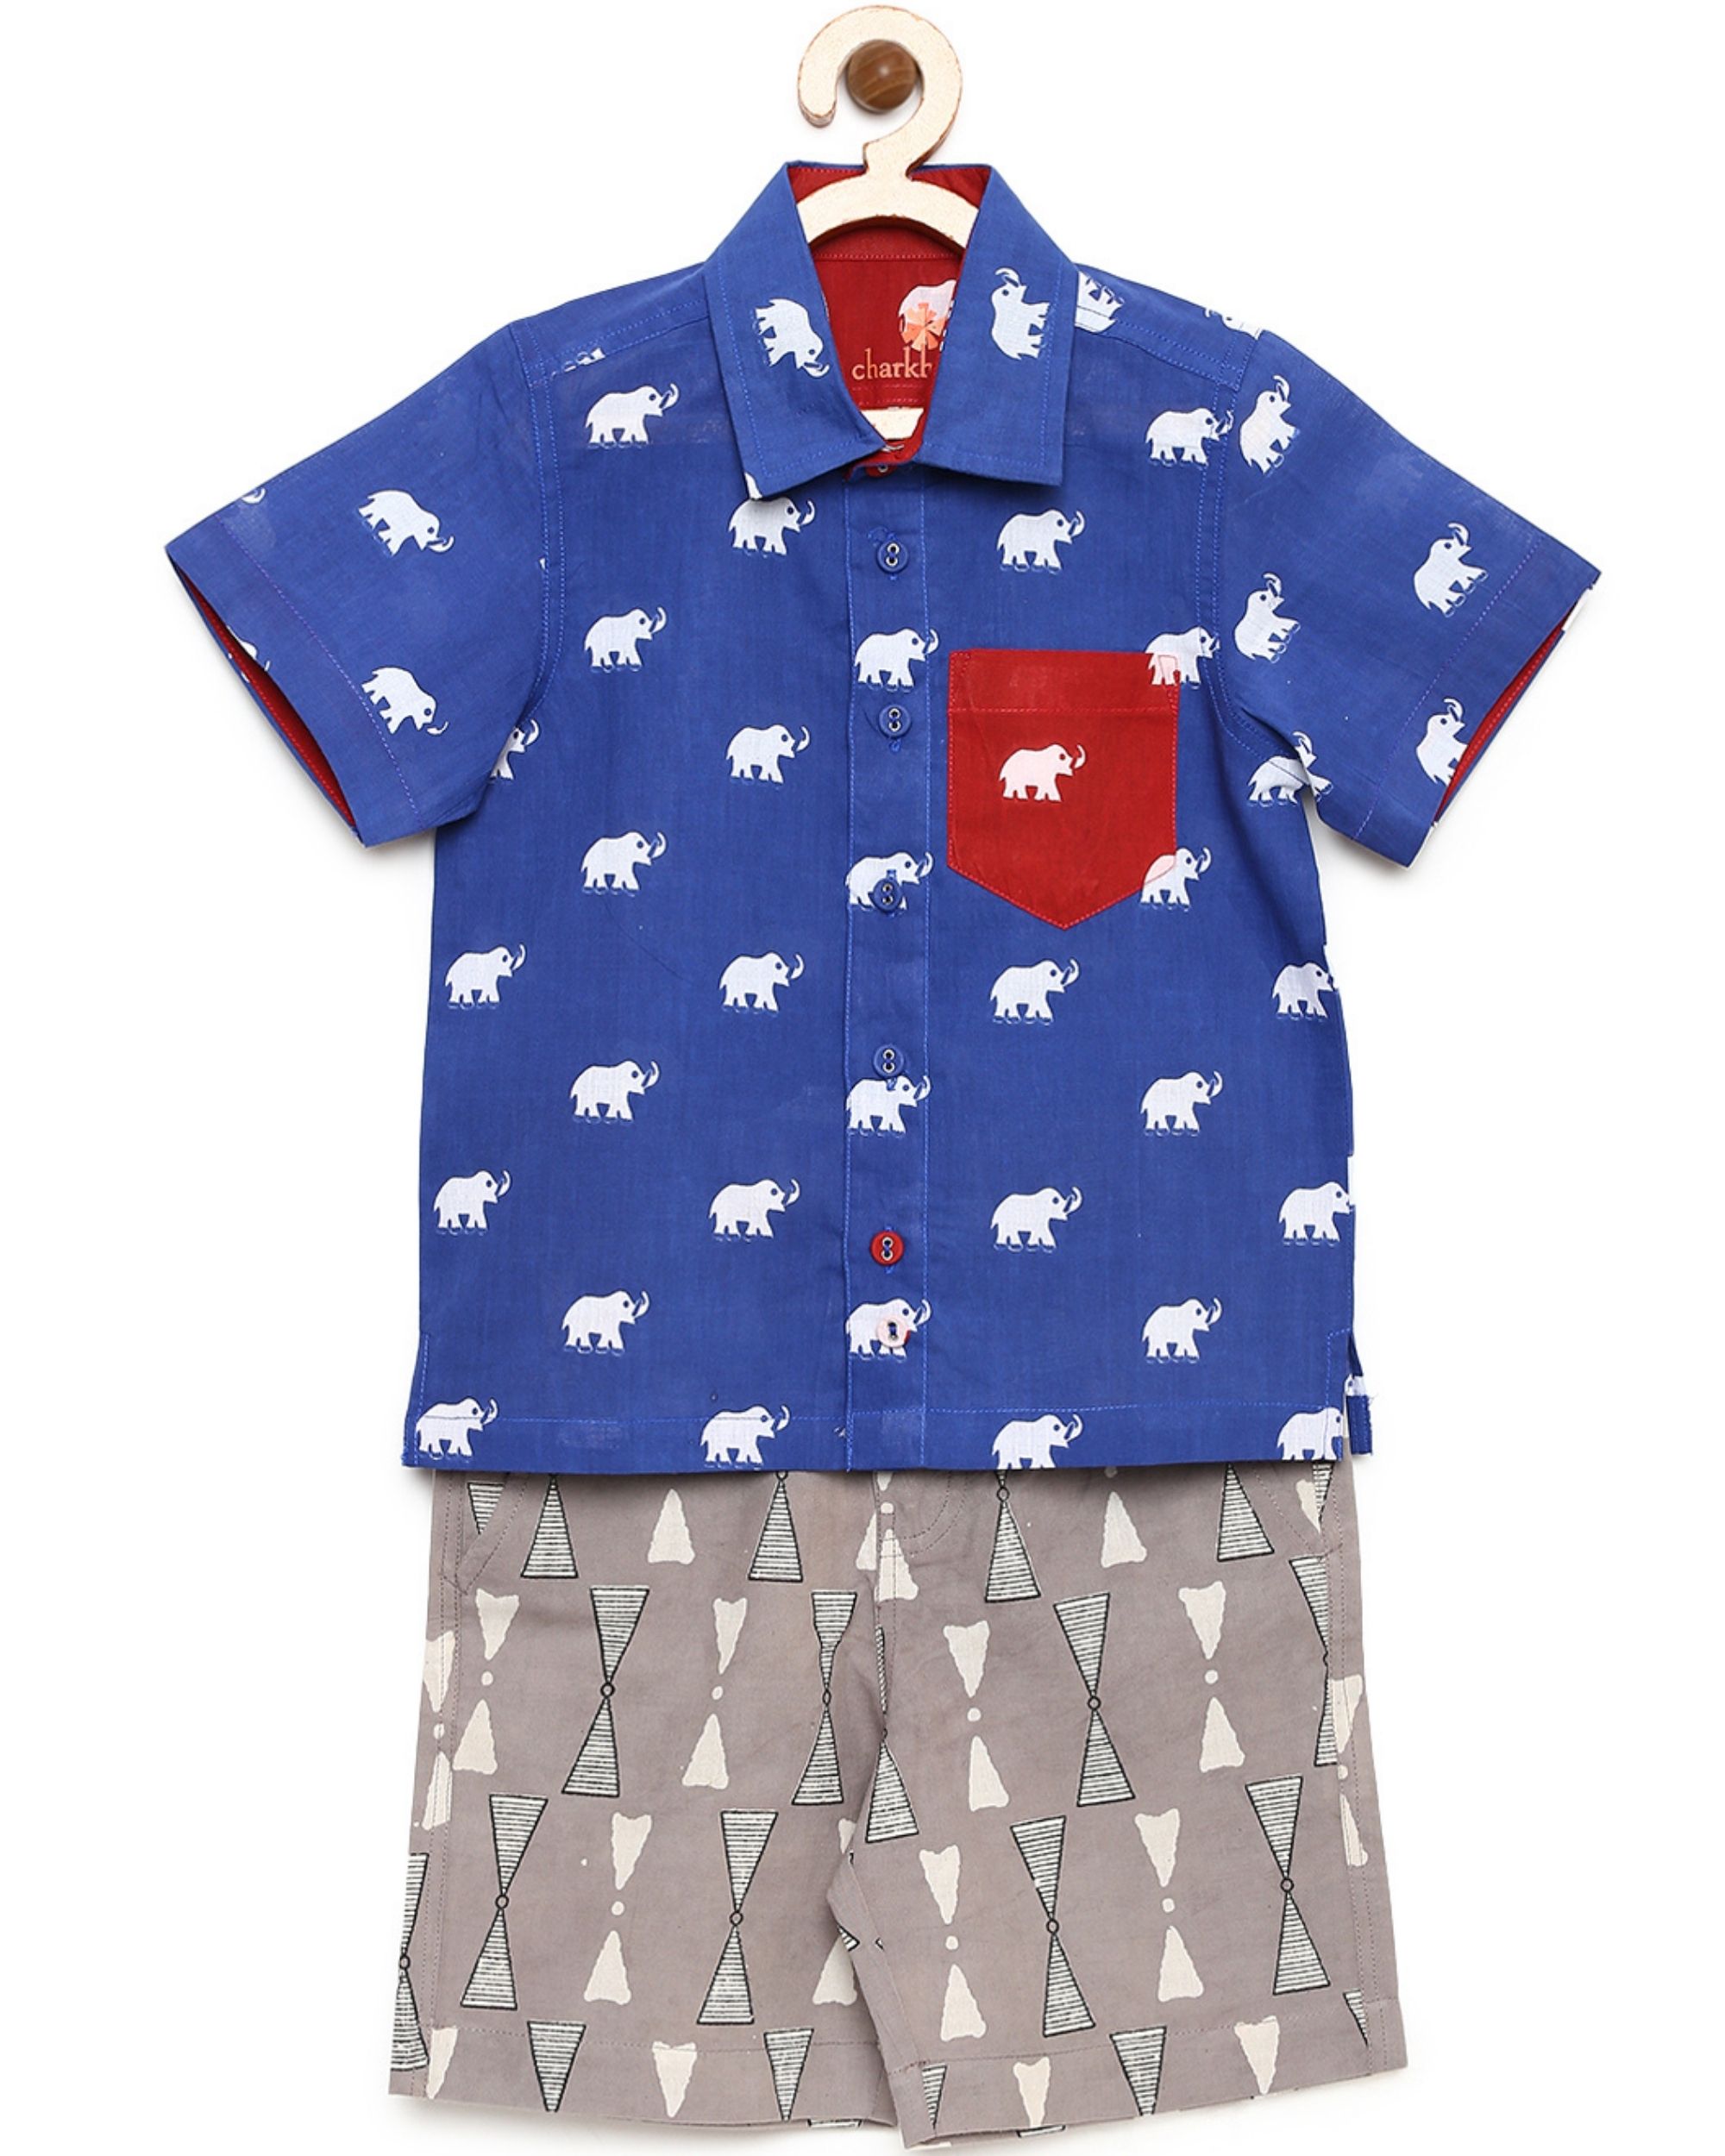 Blue elephant printed shirt with grey shorts - set of two